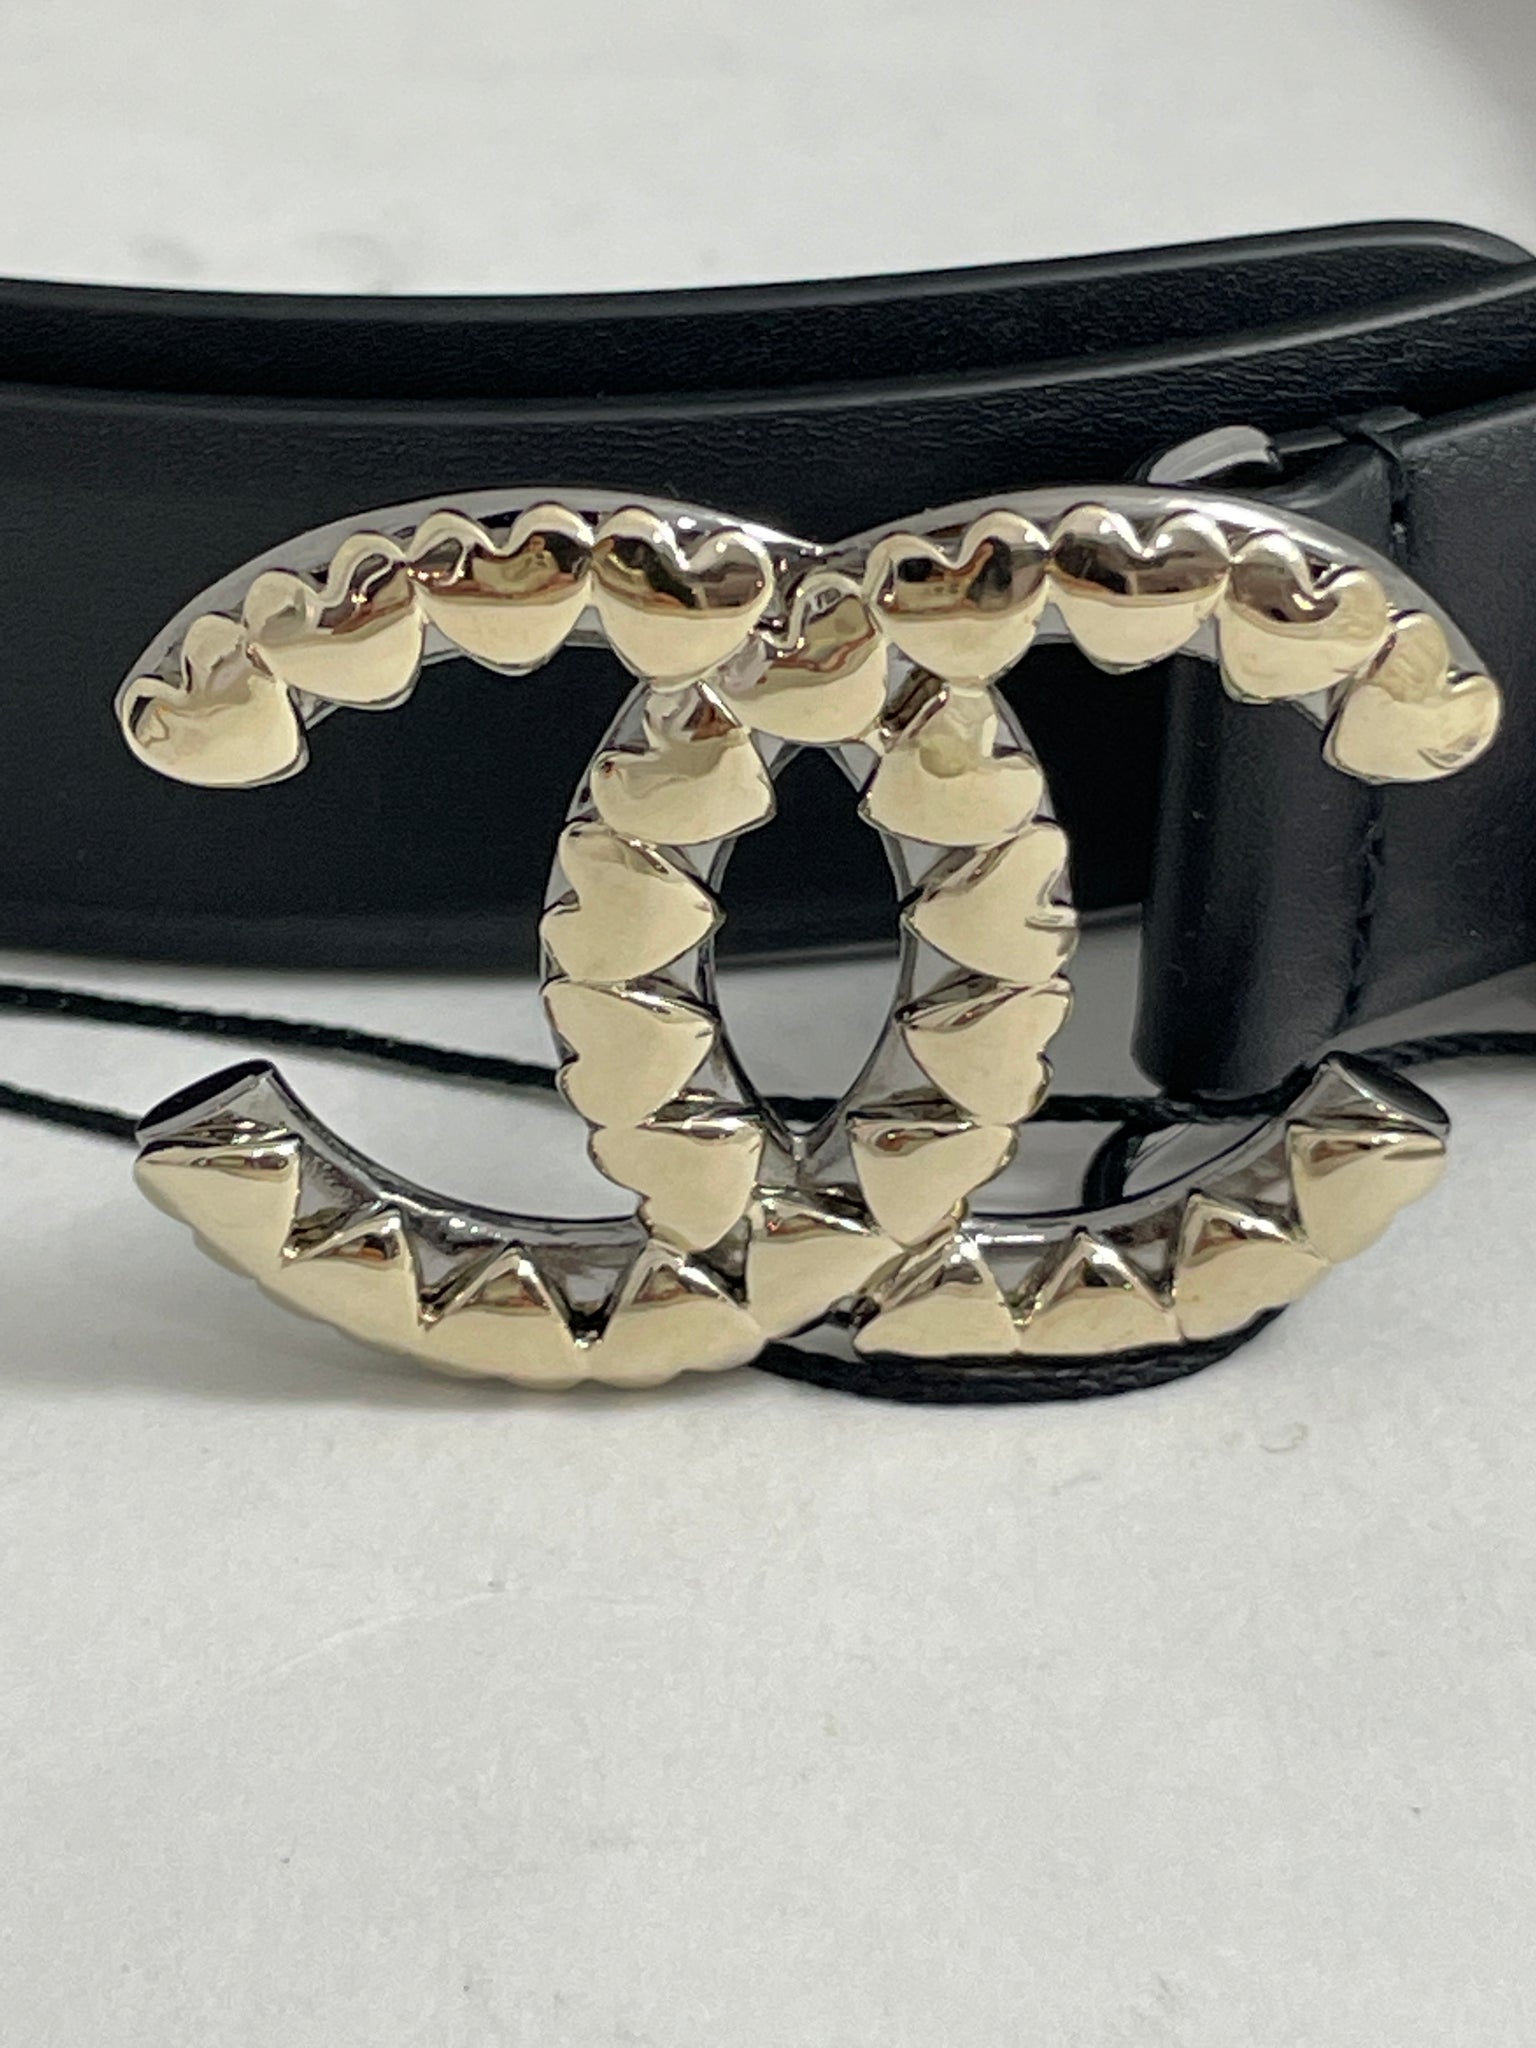 Chanel Black Leather Belt With Gold/Silver/Ruthenium Buckle – The